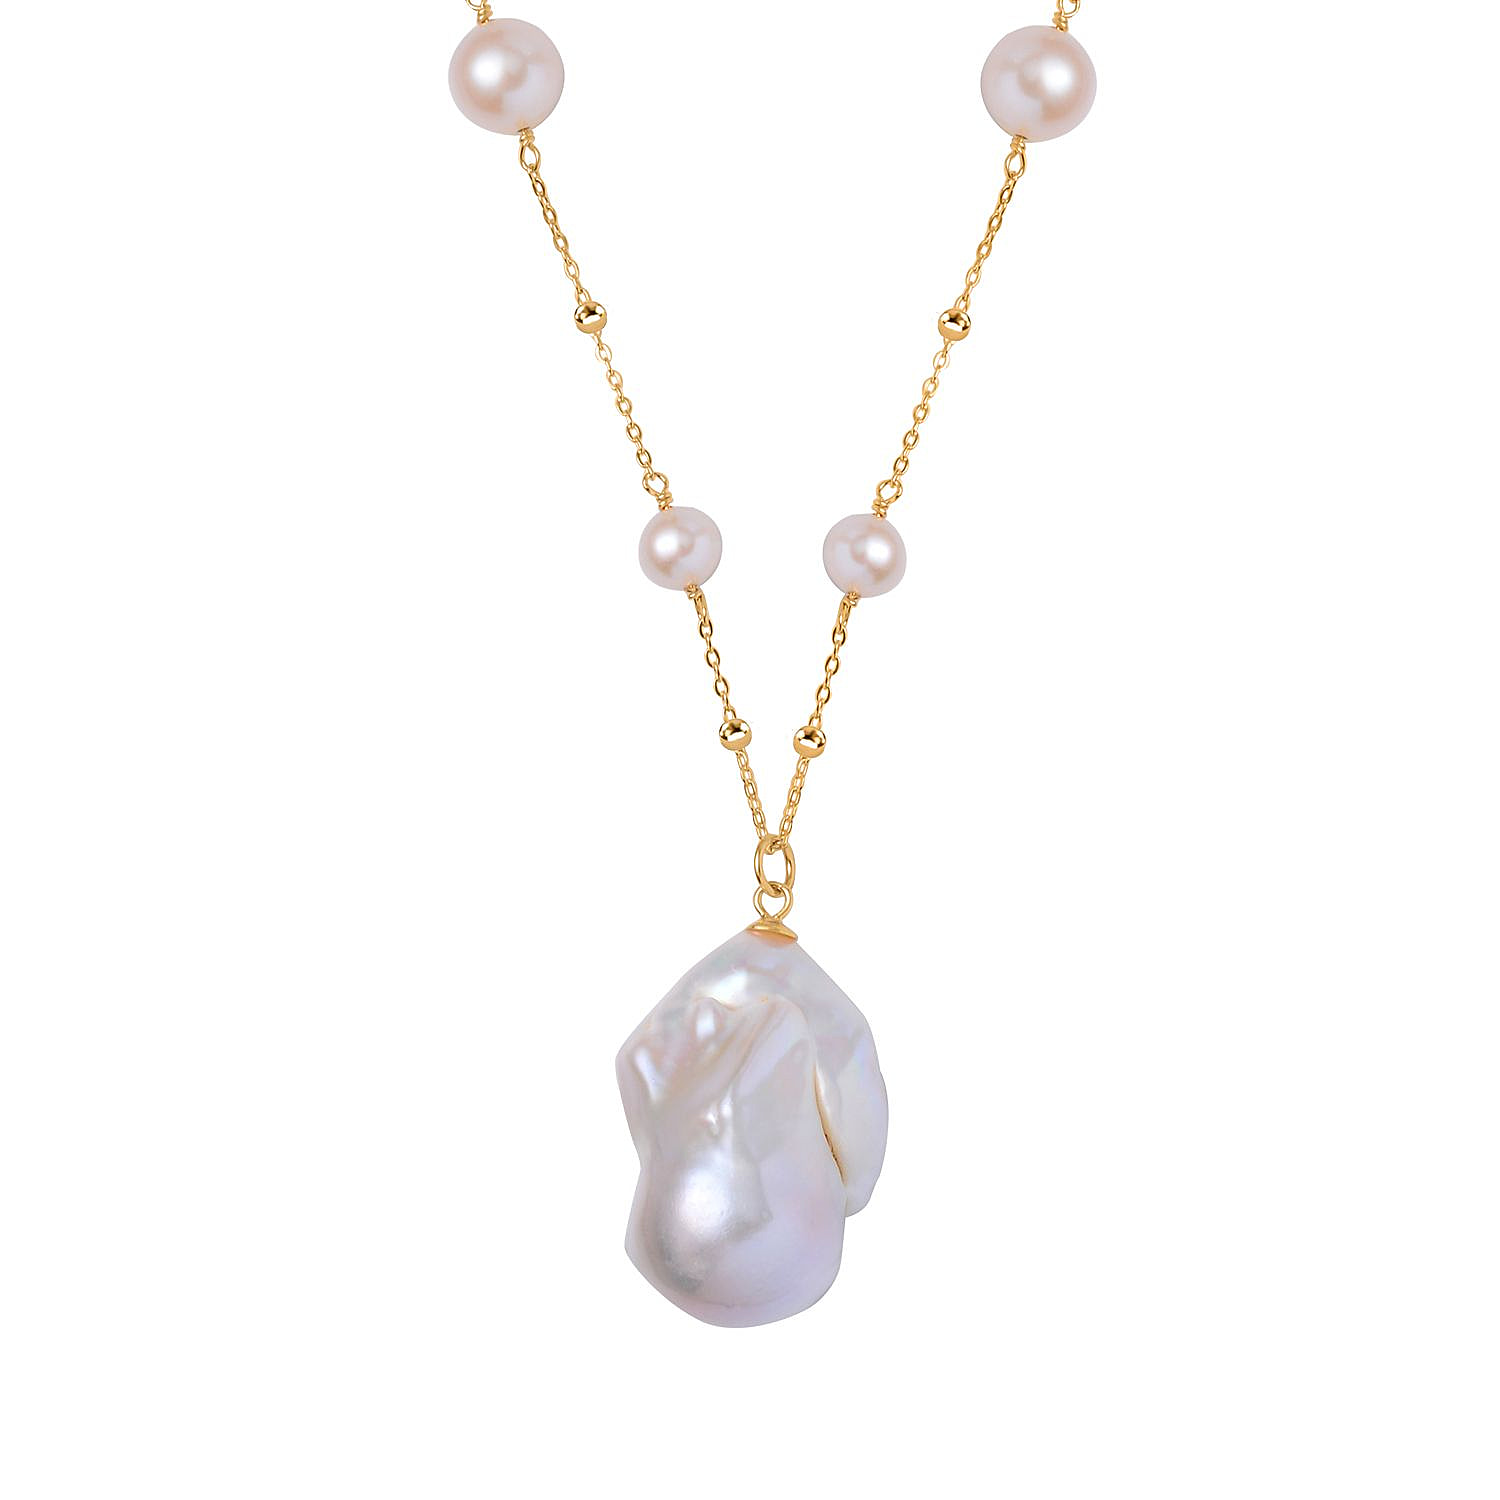 Designer Inspired -White Baroque Pearl & White Fresh Water Pearl Necklace (Size - 20) in Yellow Gold Overlay Sterling Silver